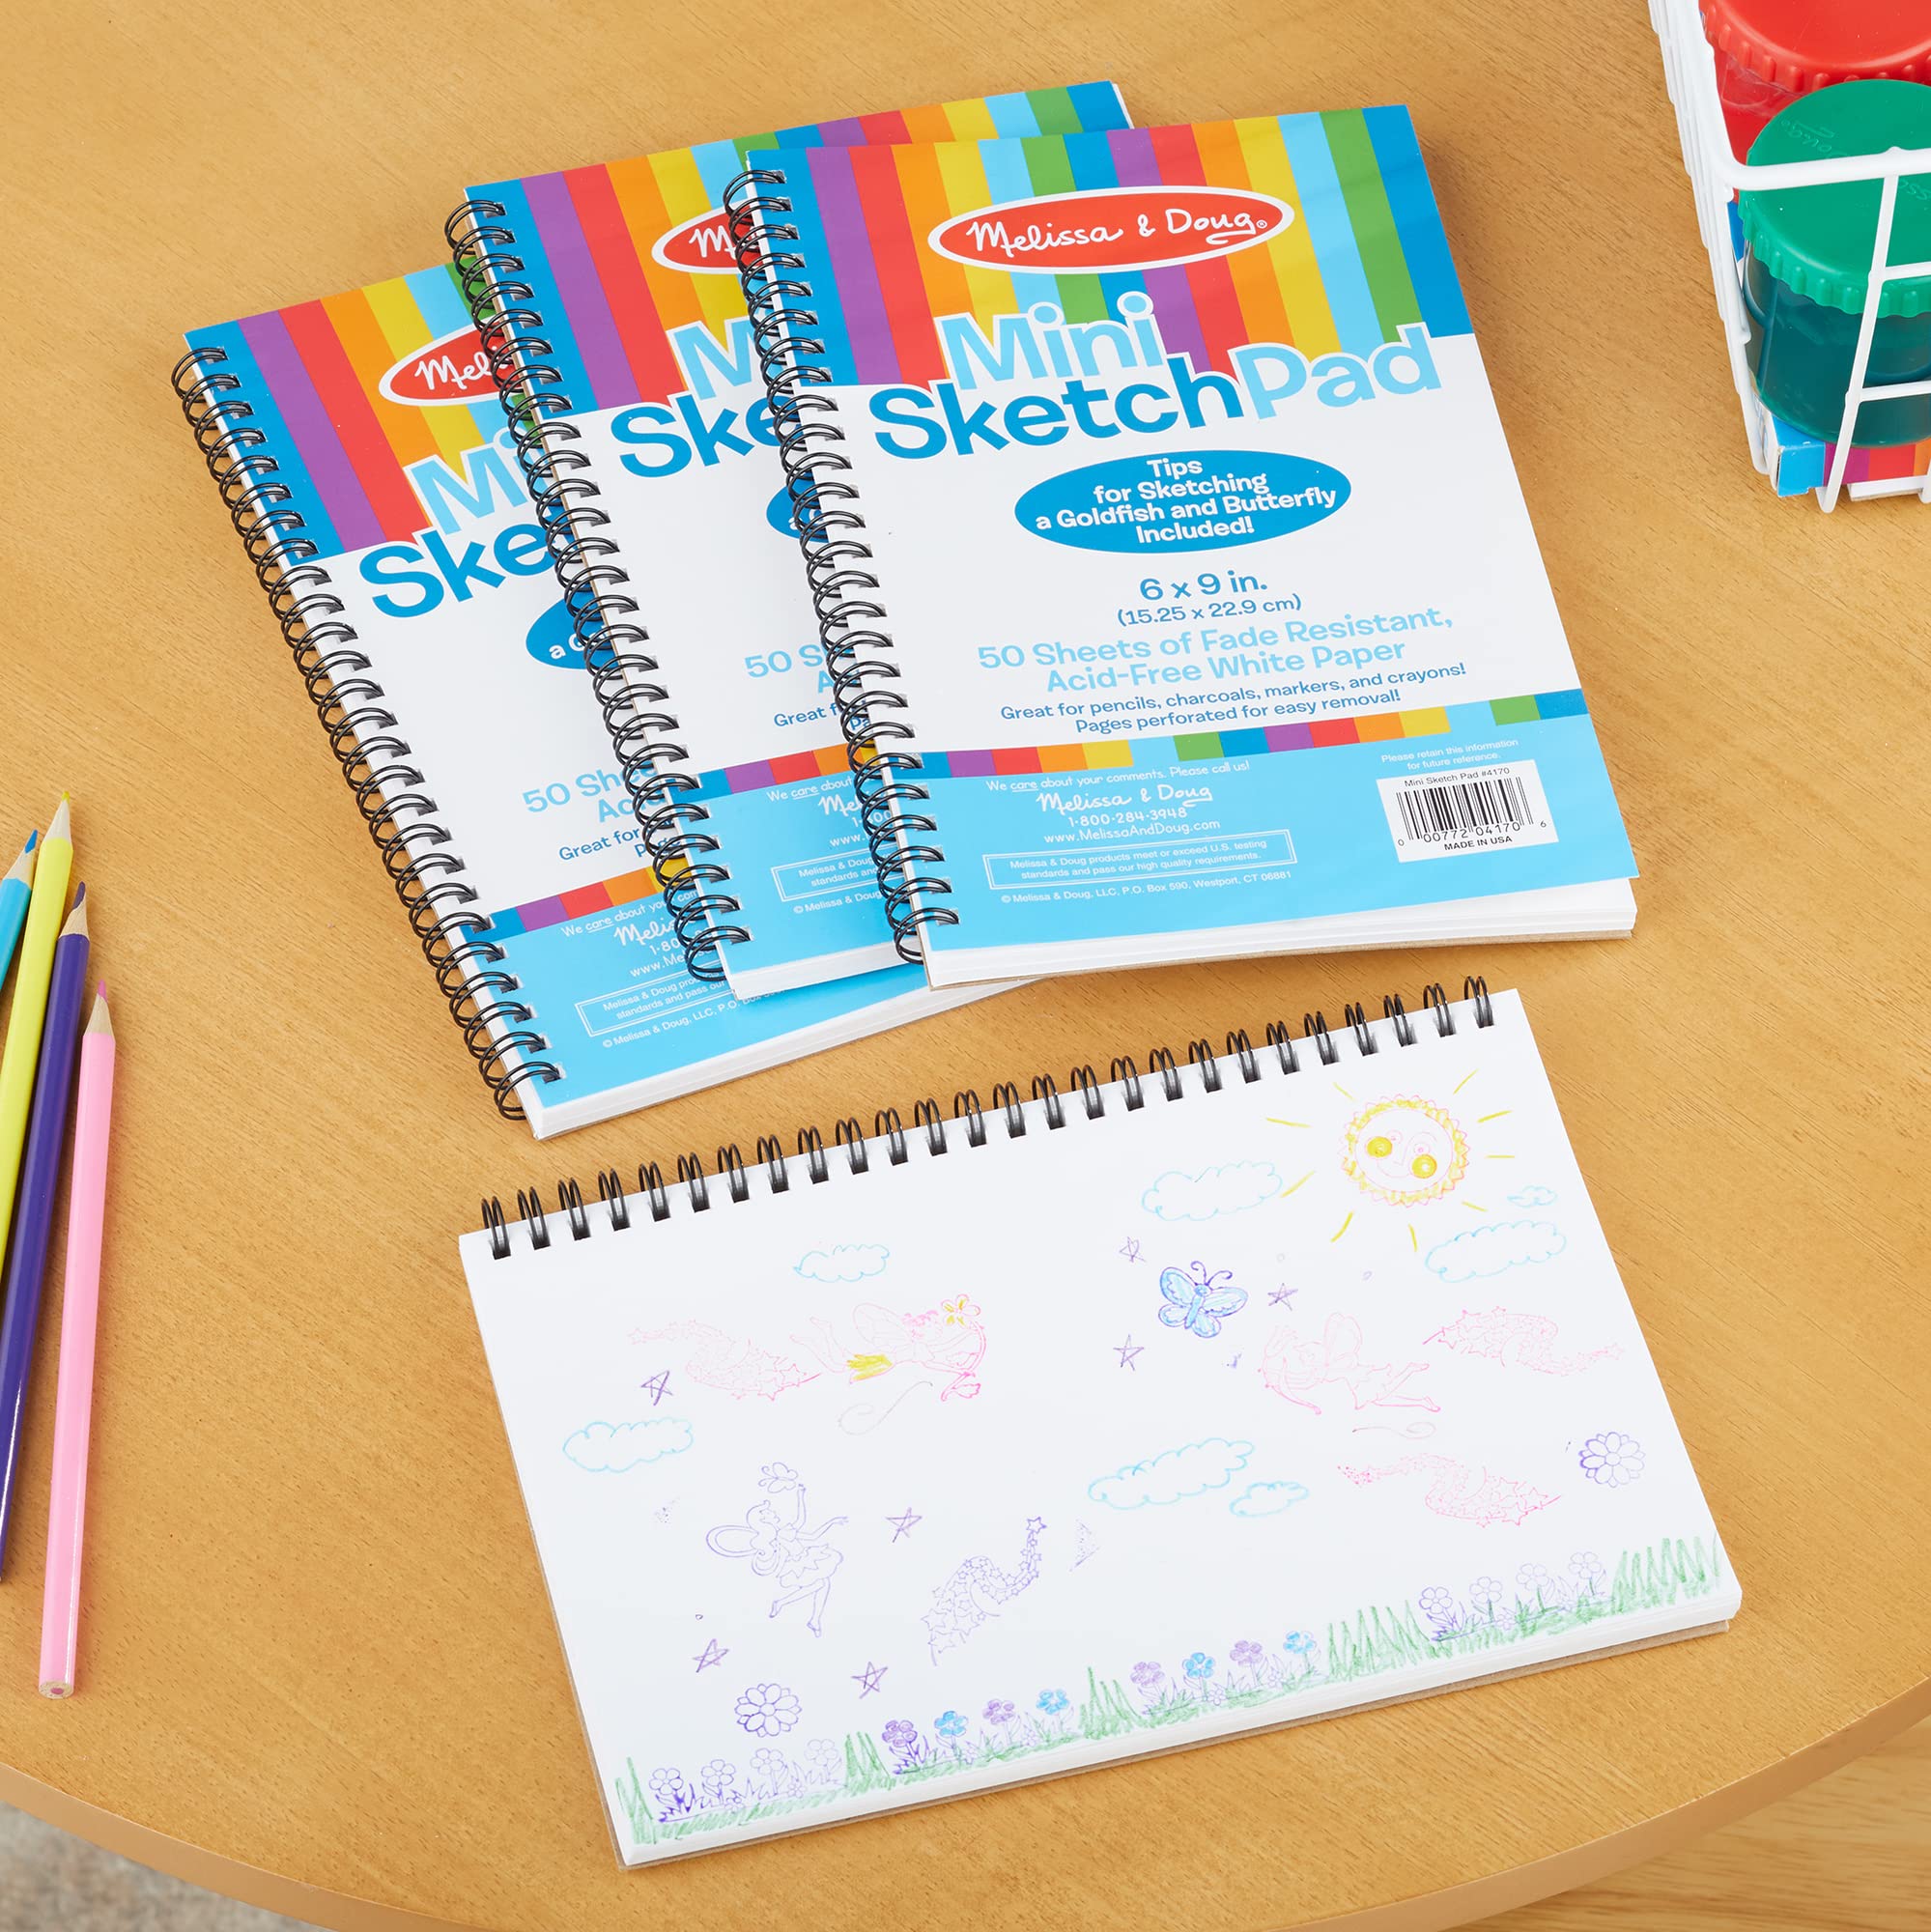 Melissa & Doug Mini-Sketch Spiral-Bound Pad (6 x 9 inches) - 4-Pack - Sketch Book For Kids, Kids Drawing Paper, Drawing And Coloring Pads For Kids, Kids Art Supplies